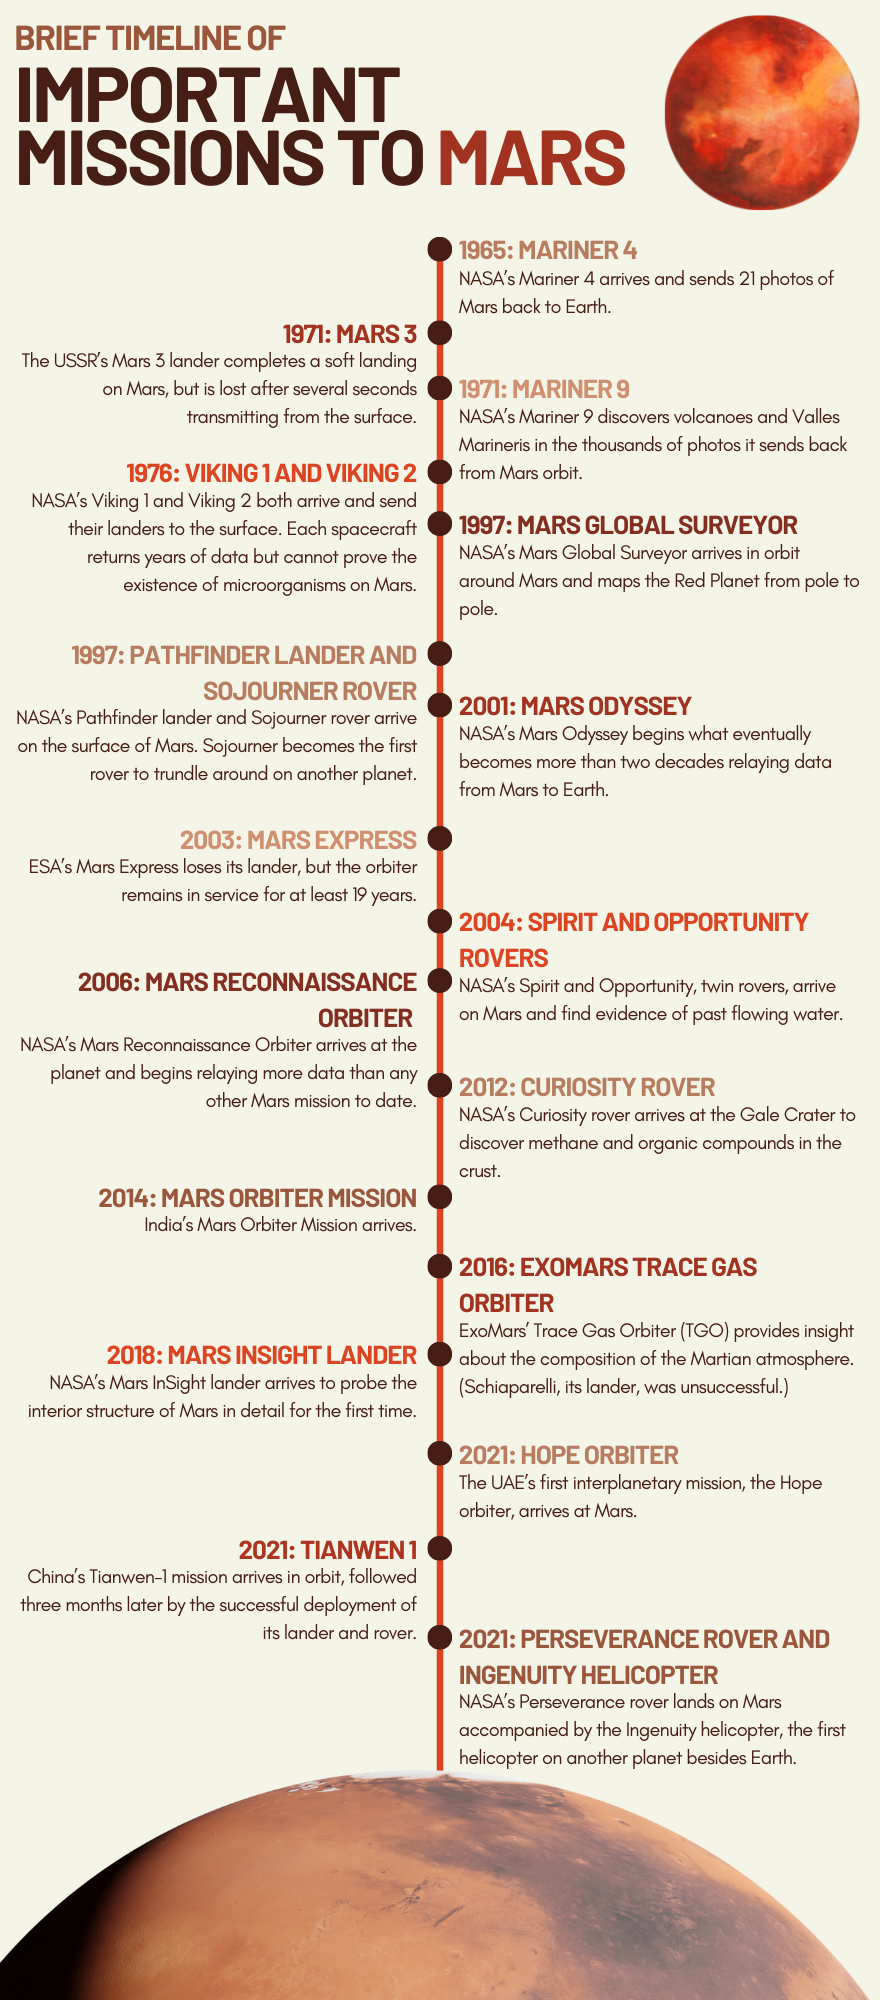 A brief timeline of important Mars missions.